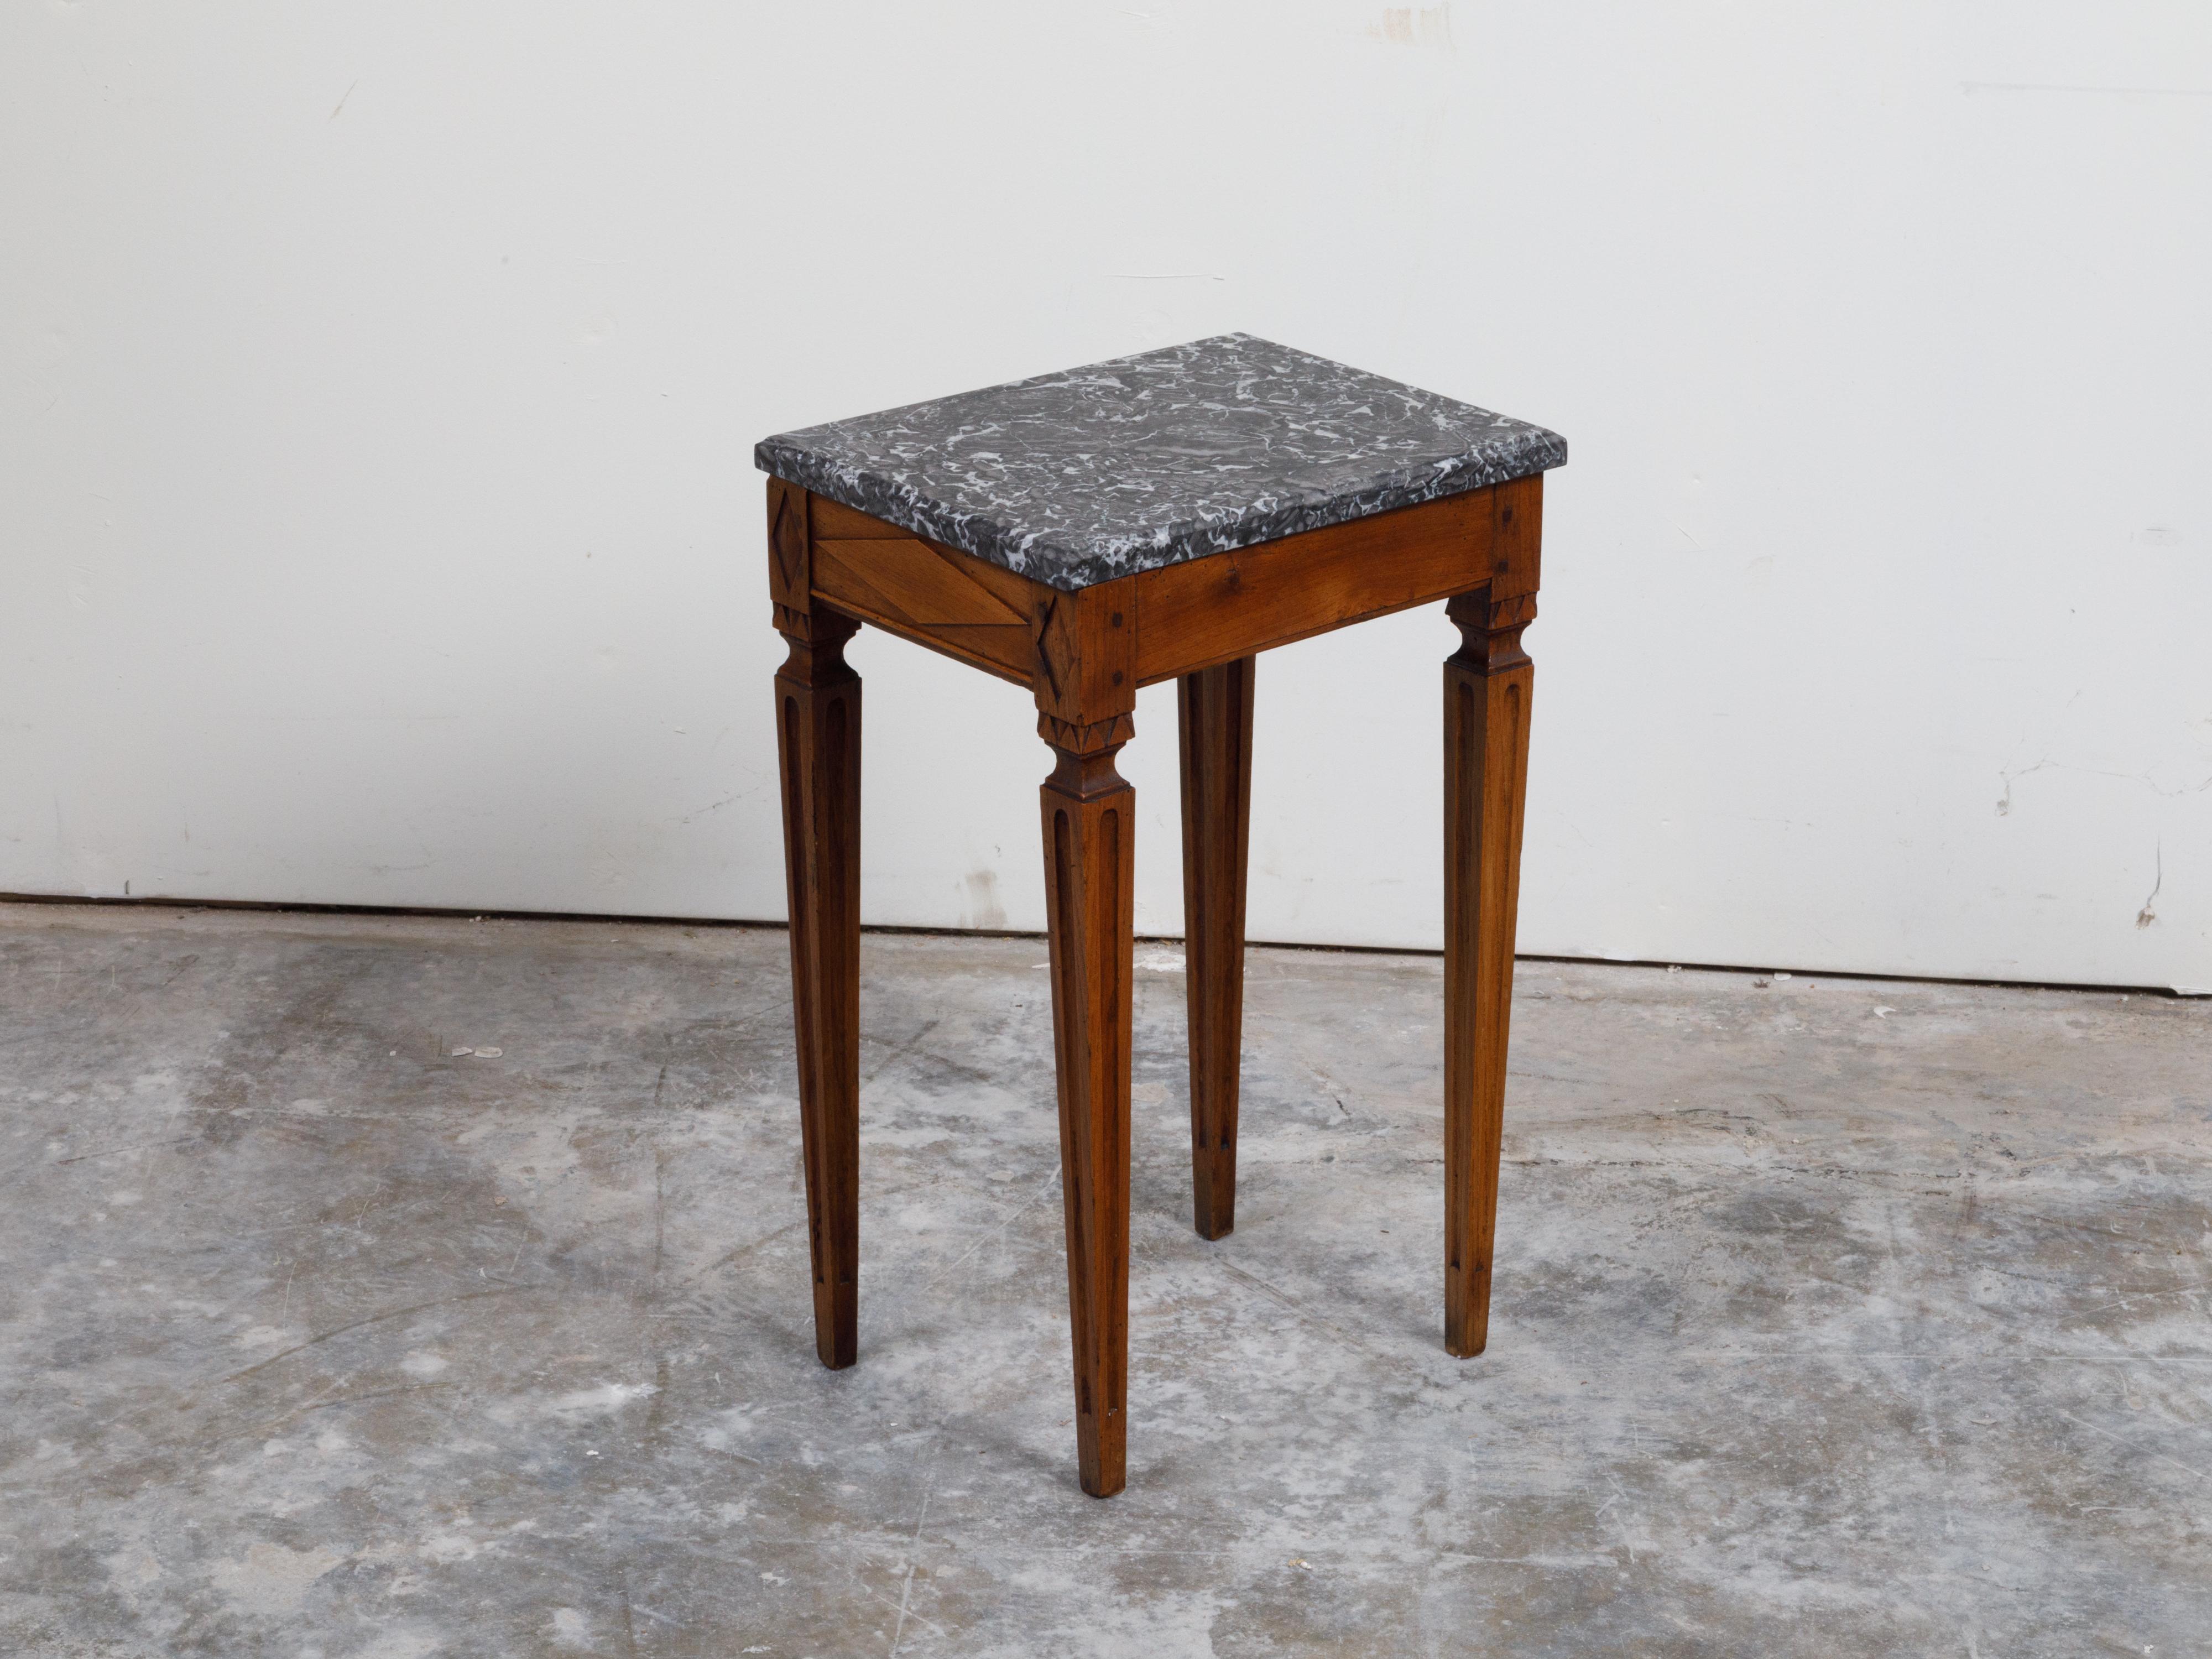 French Neoclassical Style 19th Century Wooden Table with Grey Veined Marble Top For Sale 2